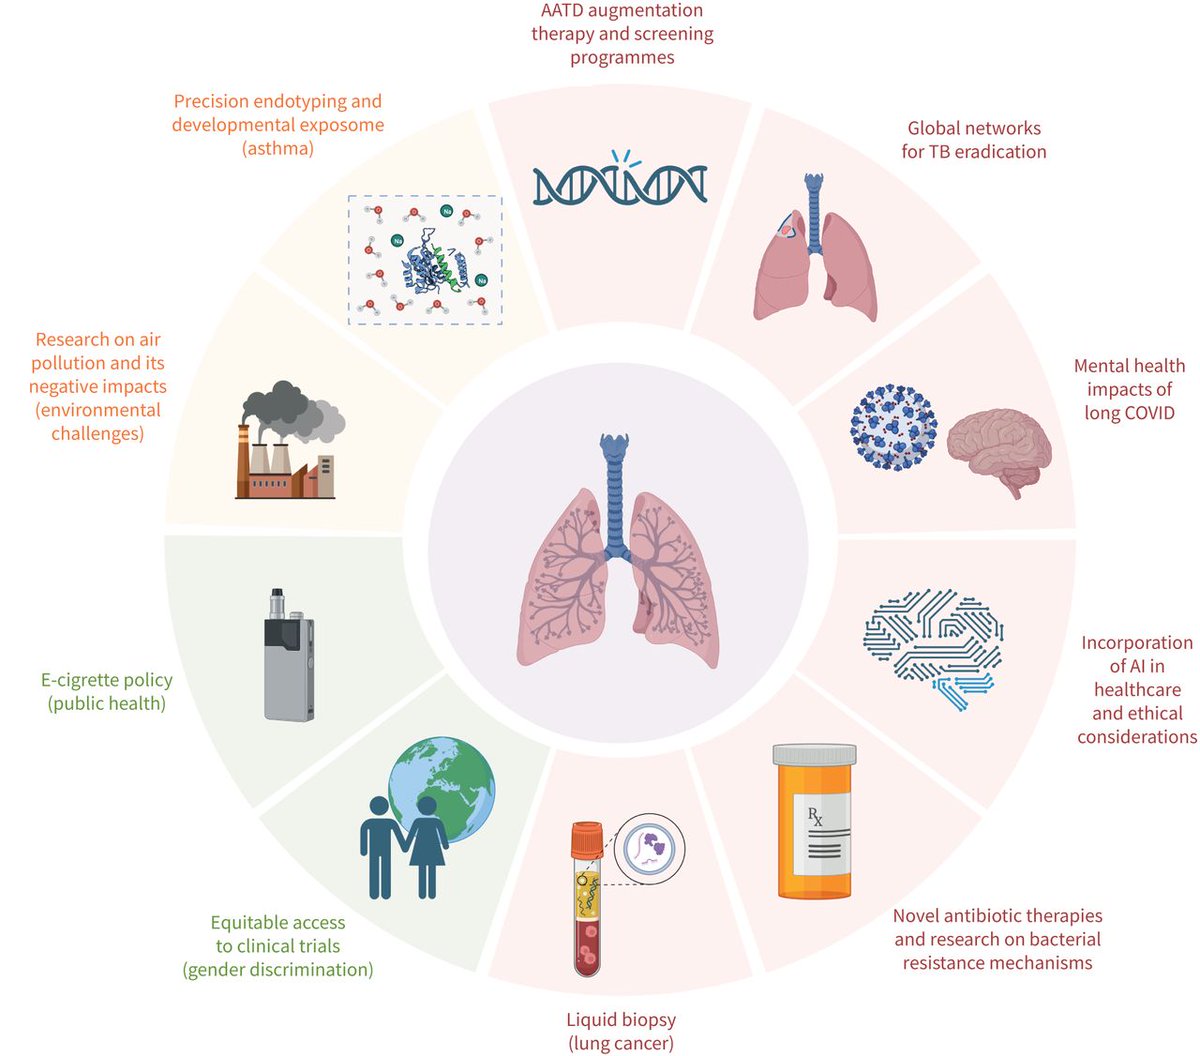 ERR: Addressing global respiratory health priorities across clinical, translational, epidemiological and population health domains requires effort from individuals, communities, governments, healthcare systems, stakeholders and international organisations. bit.ly/3RYfPaE